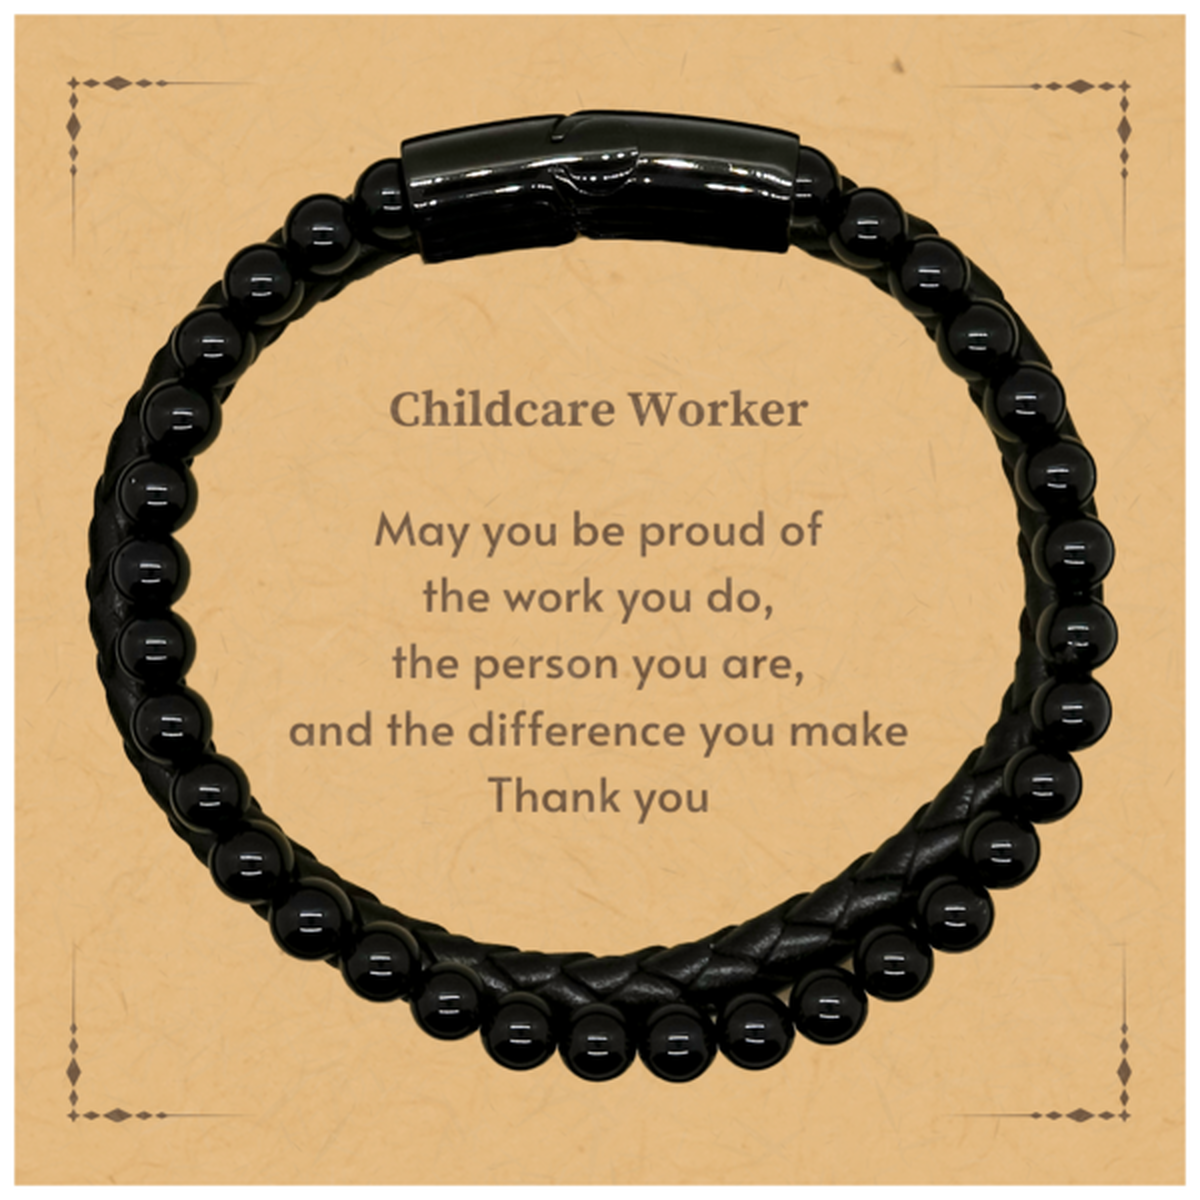 Heartwarming Stone Leather Bracelets Retirement Coworkers Gifts for Childcare Worker, Childcare Worker May You be proud of the work you do, the person you are Gifts for Boss Men Women Friends